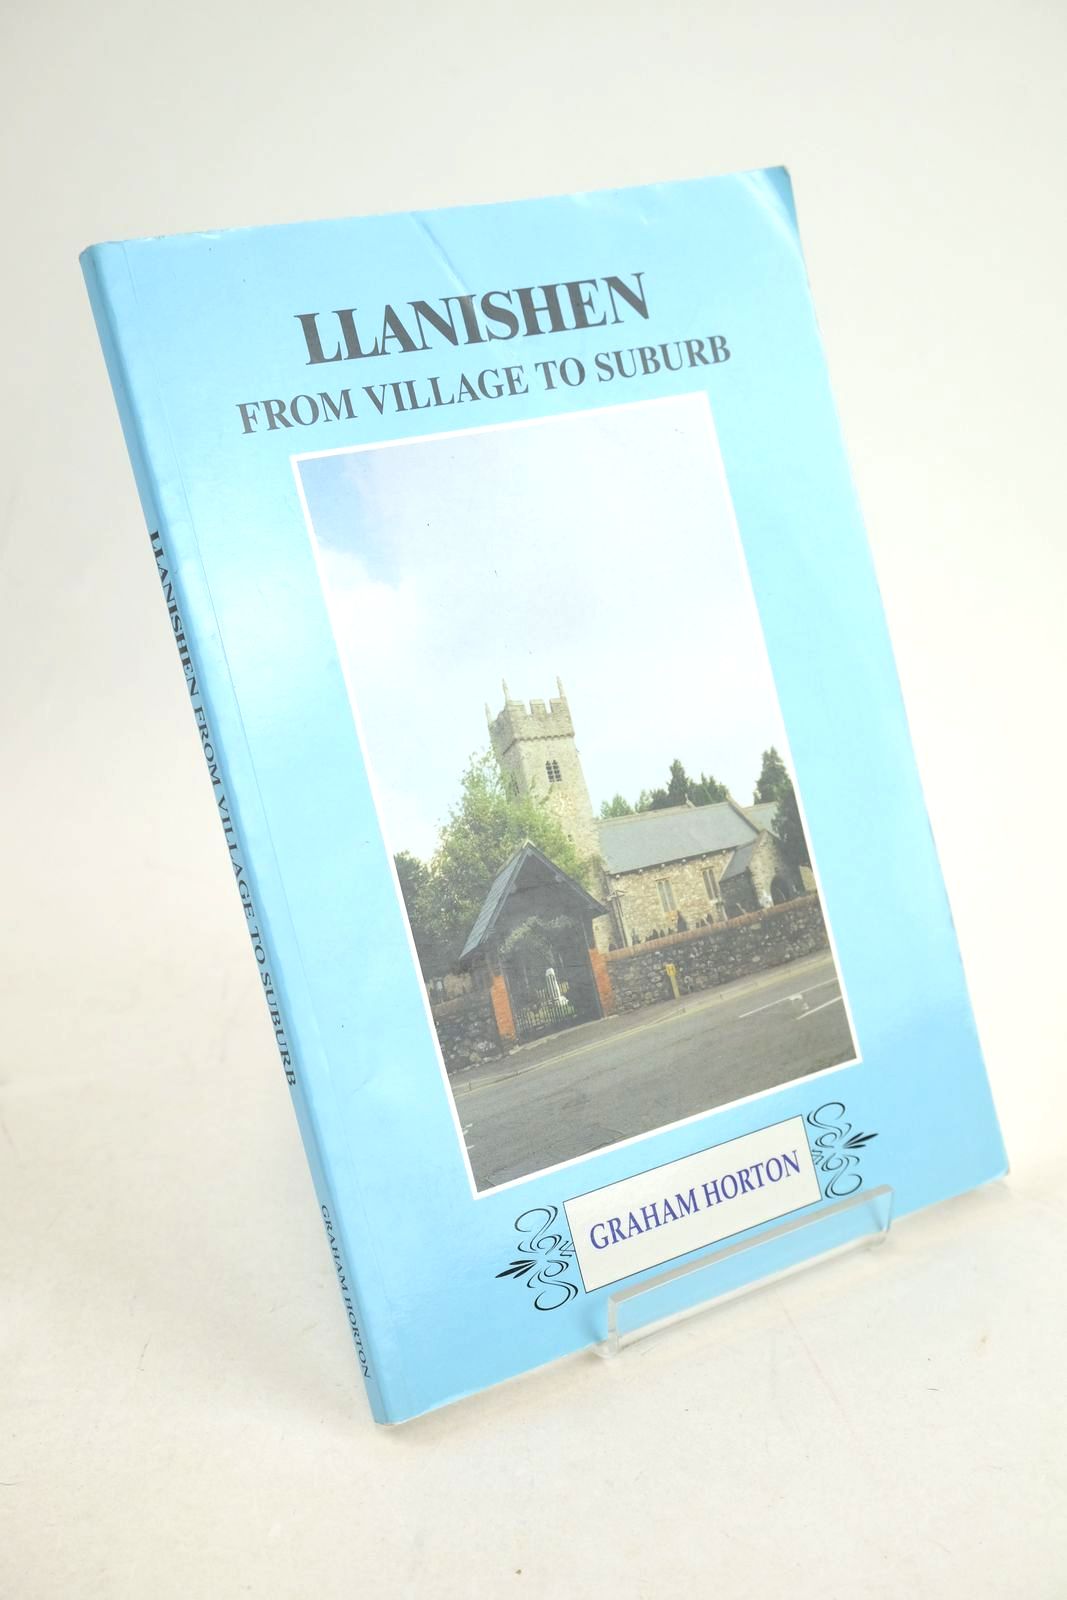 Photo of LLANISHEN FROM VILLAGE TO SUBURB- Stock Number: 1327475